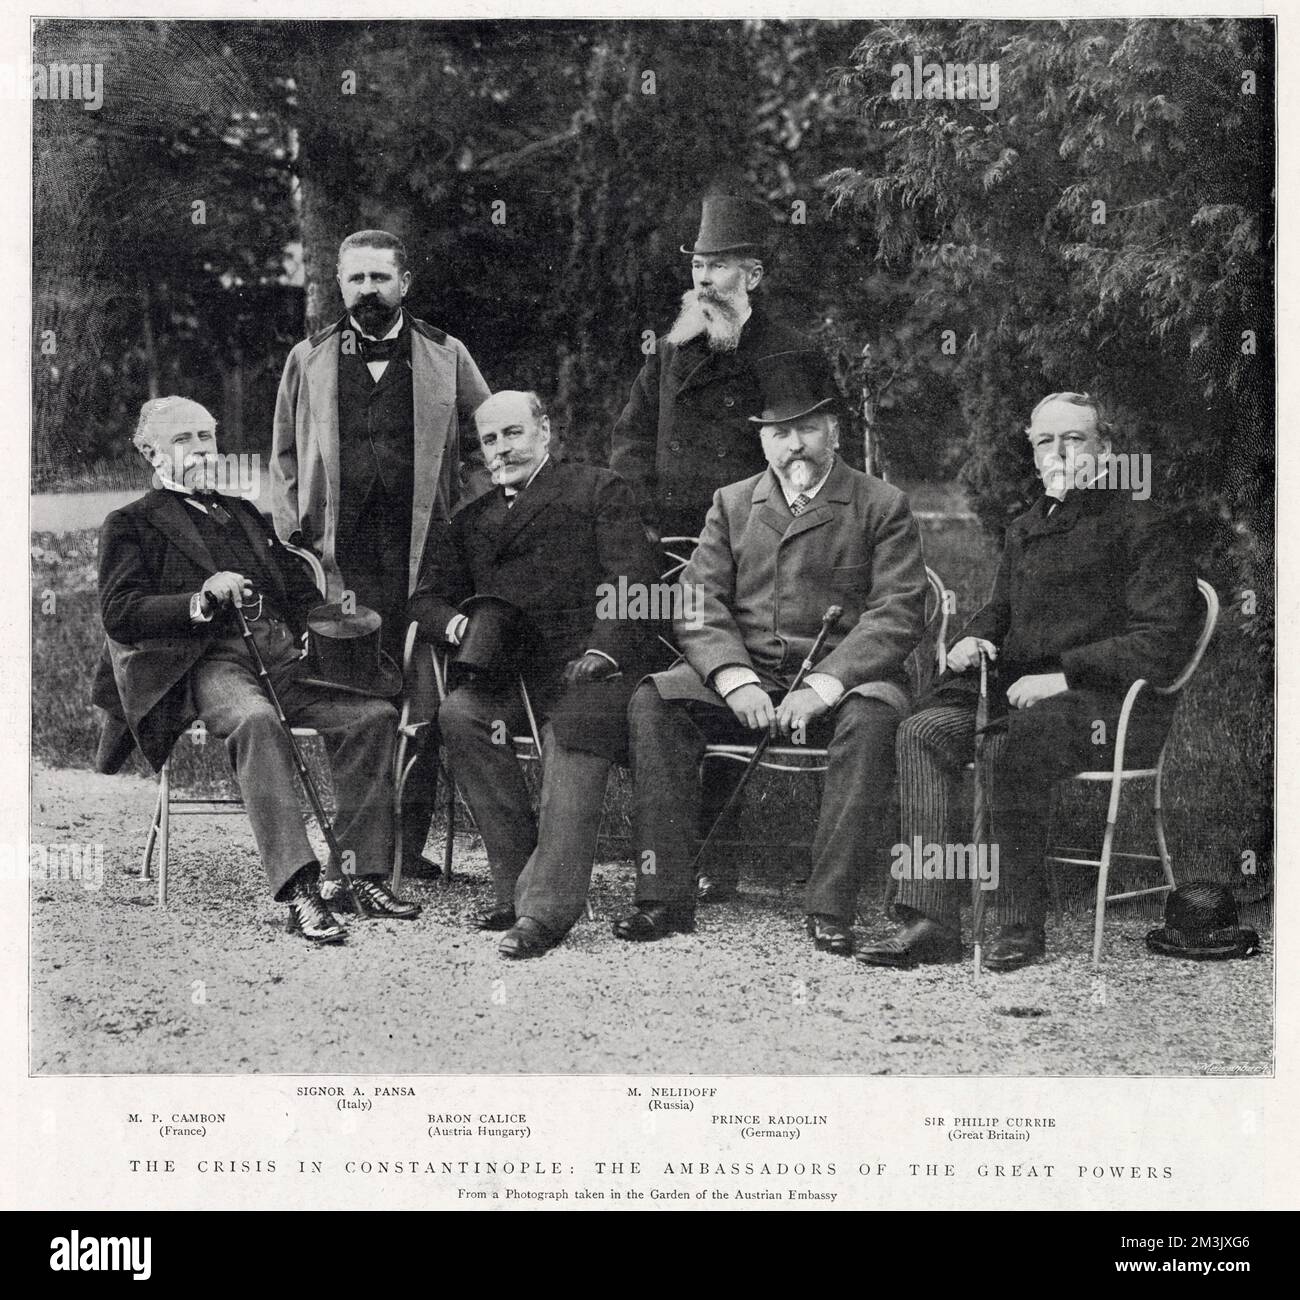 Ambassadors of the leading European powers, photographed in the garden of the Austrian Embassy, Constantinople (now Istanbul).  Those pictured are (from left to right) P. Cambon of France, A. Pansa of Italy, Baron Calice of Austria Hungary, M. Nelidoff of Russia, Prince Radolin of Germany and Sir Philip Currie of Great Britain. Stock Photo